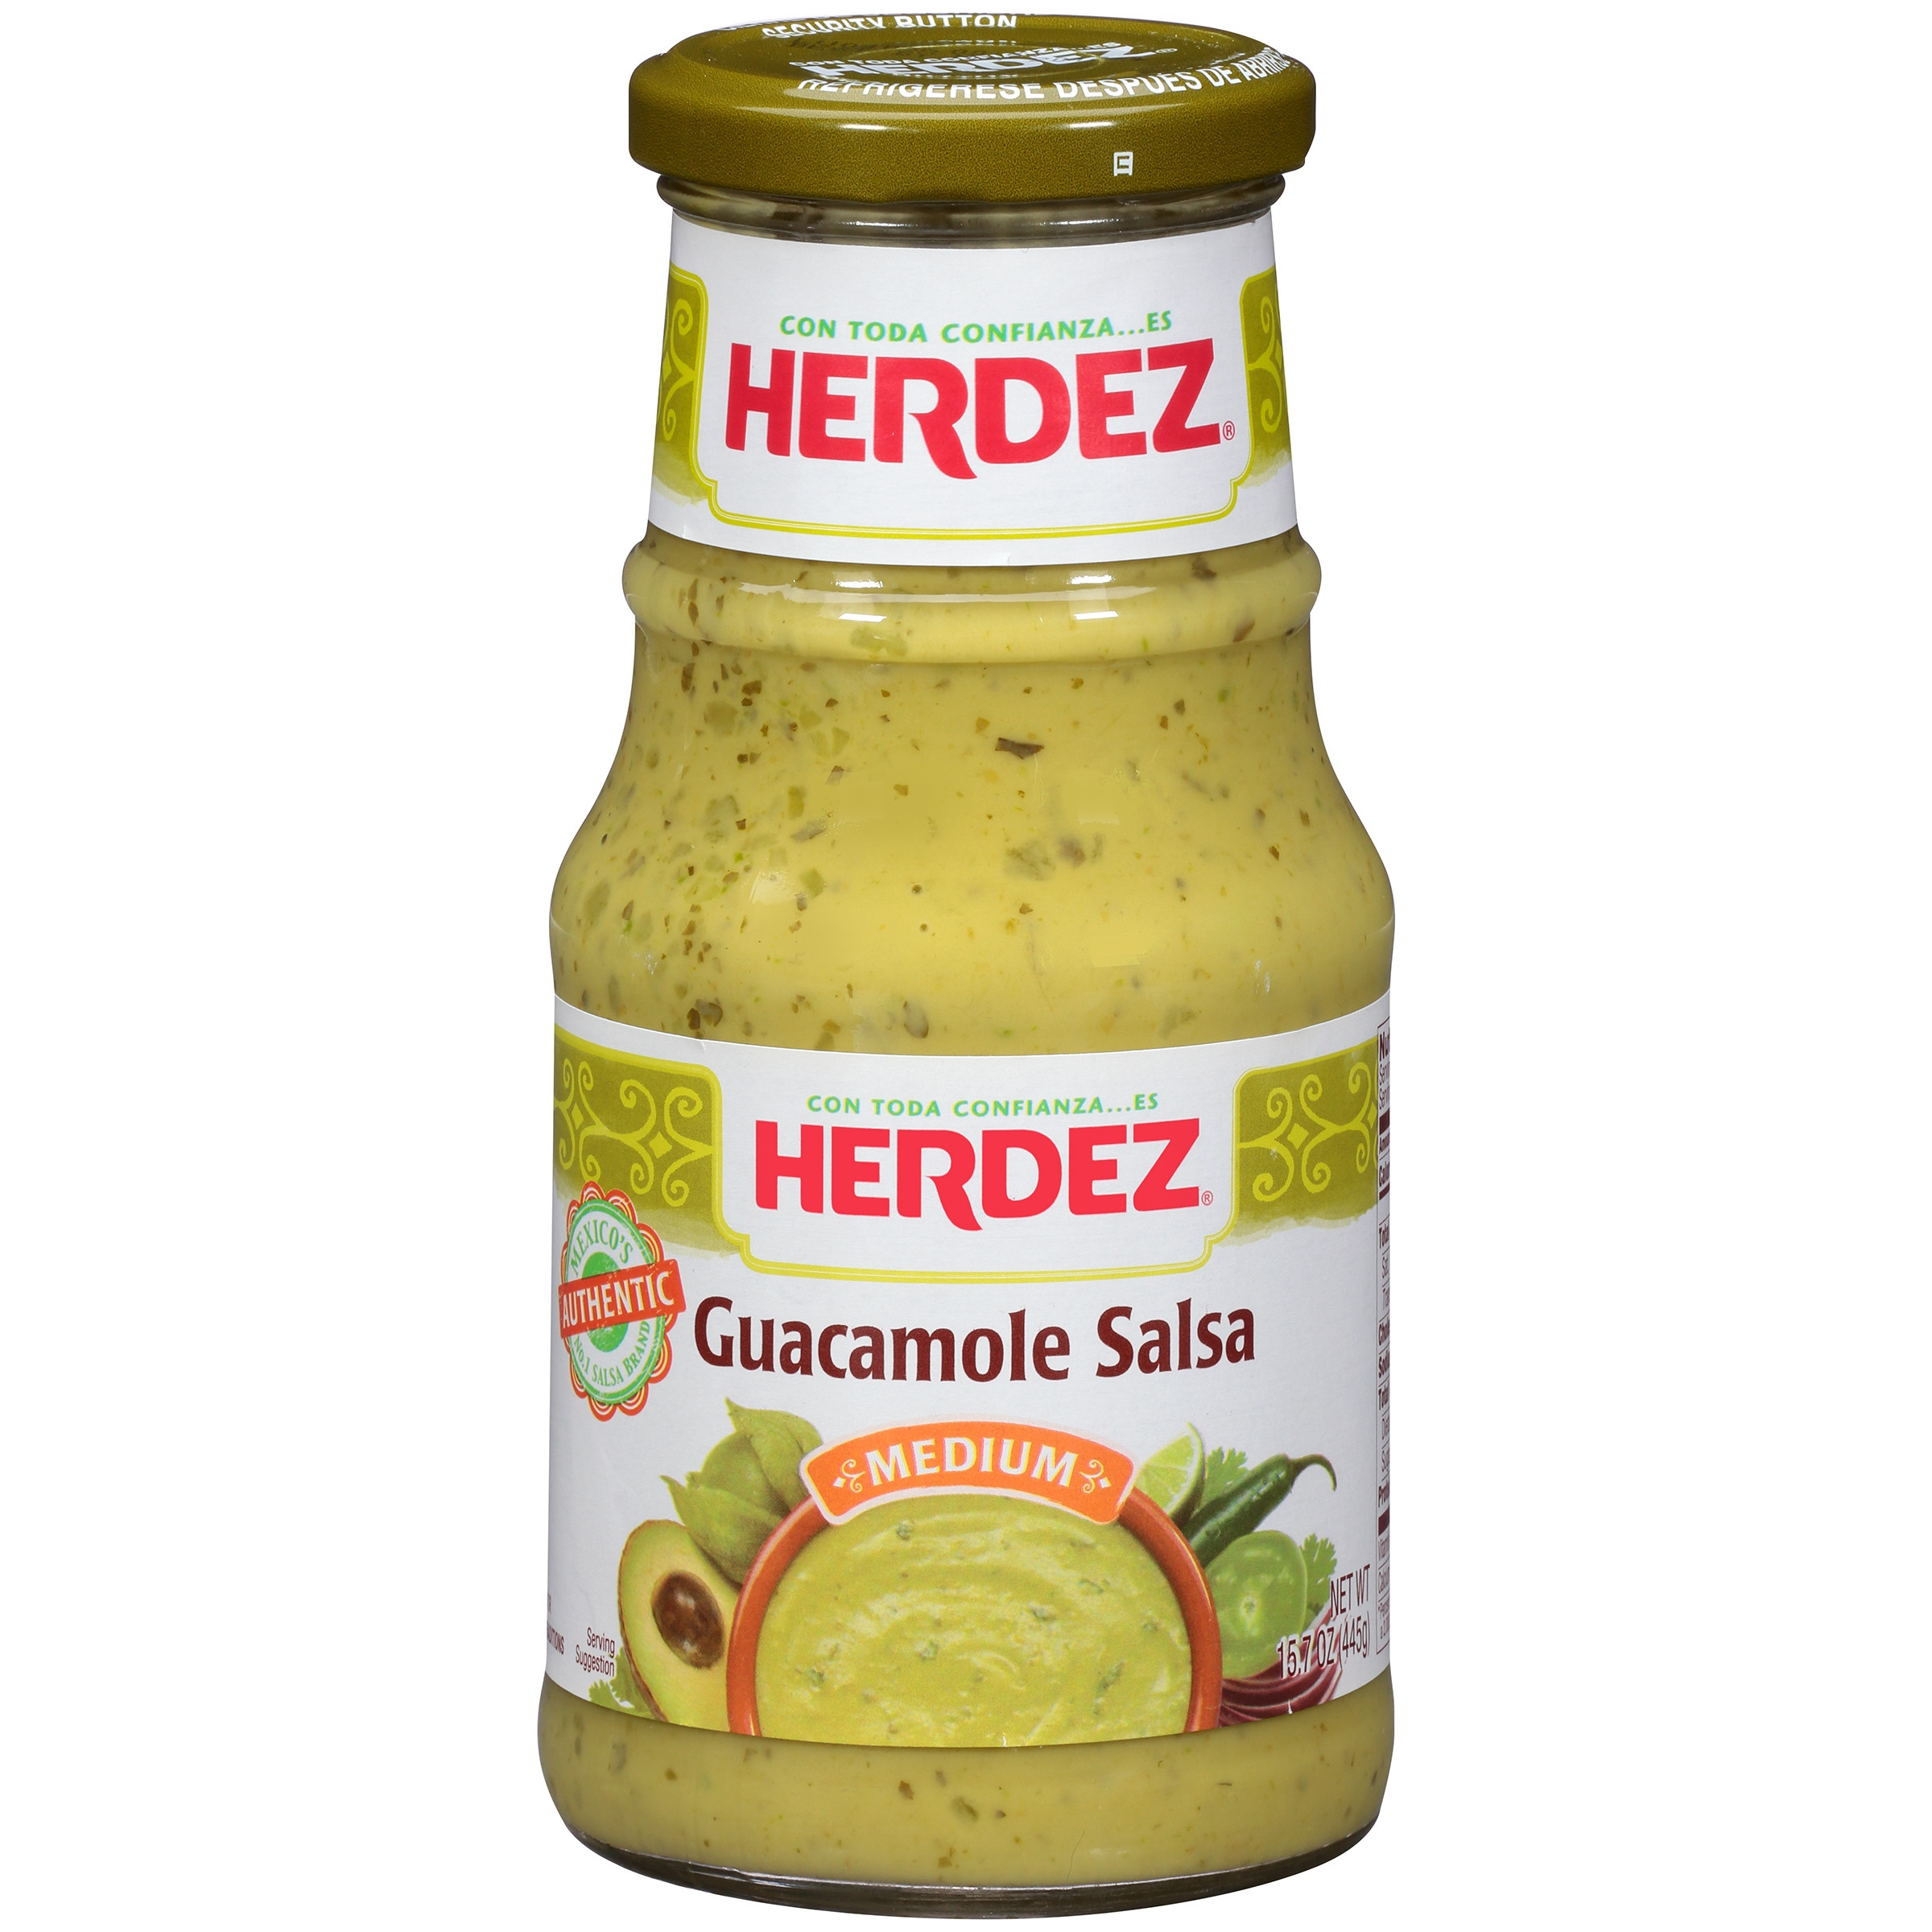 Guacamole Salsa Herdez
 See more Hot 100 Dips Spreads